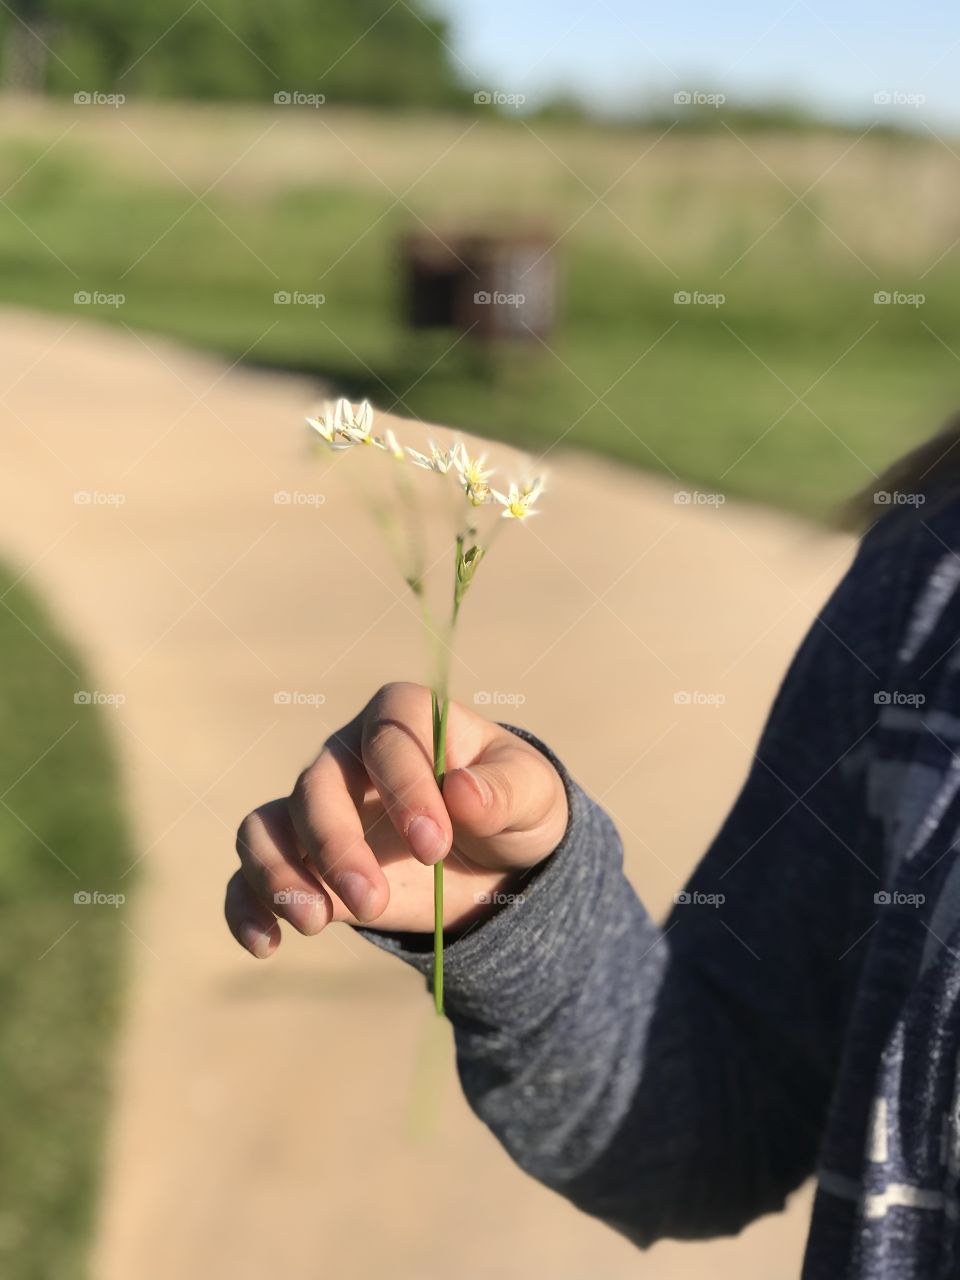 Holding a flower at the park 